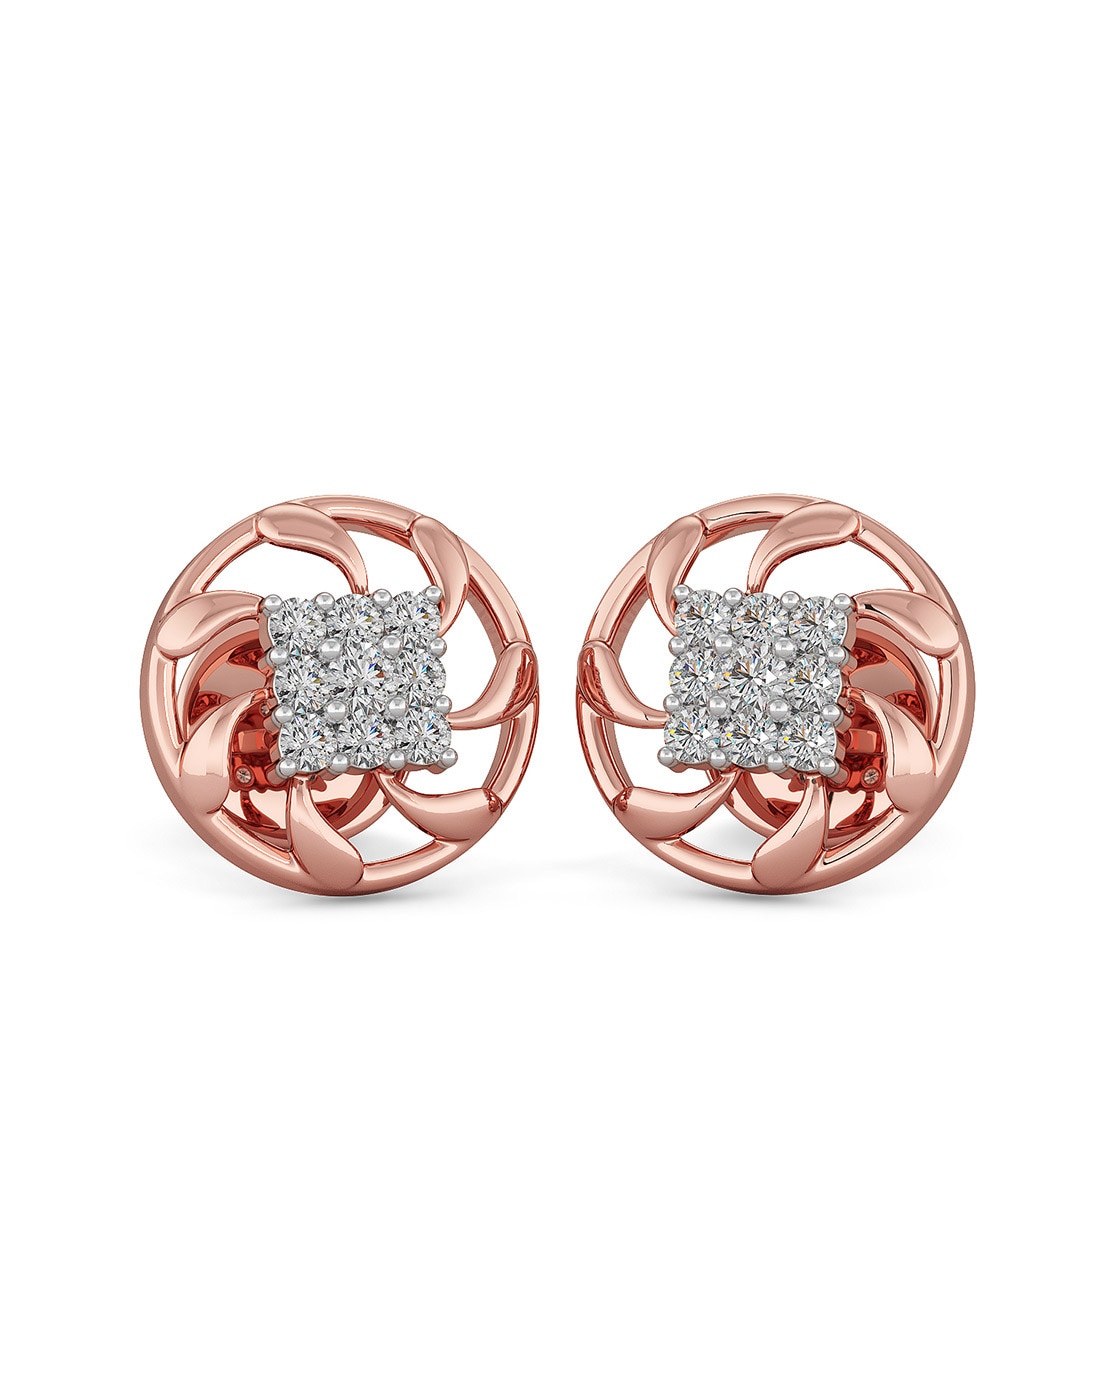 Exquisite Solitaire Diamond Stud Earrings in White and Rose Gold